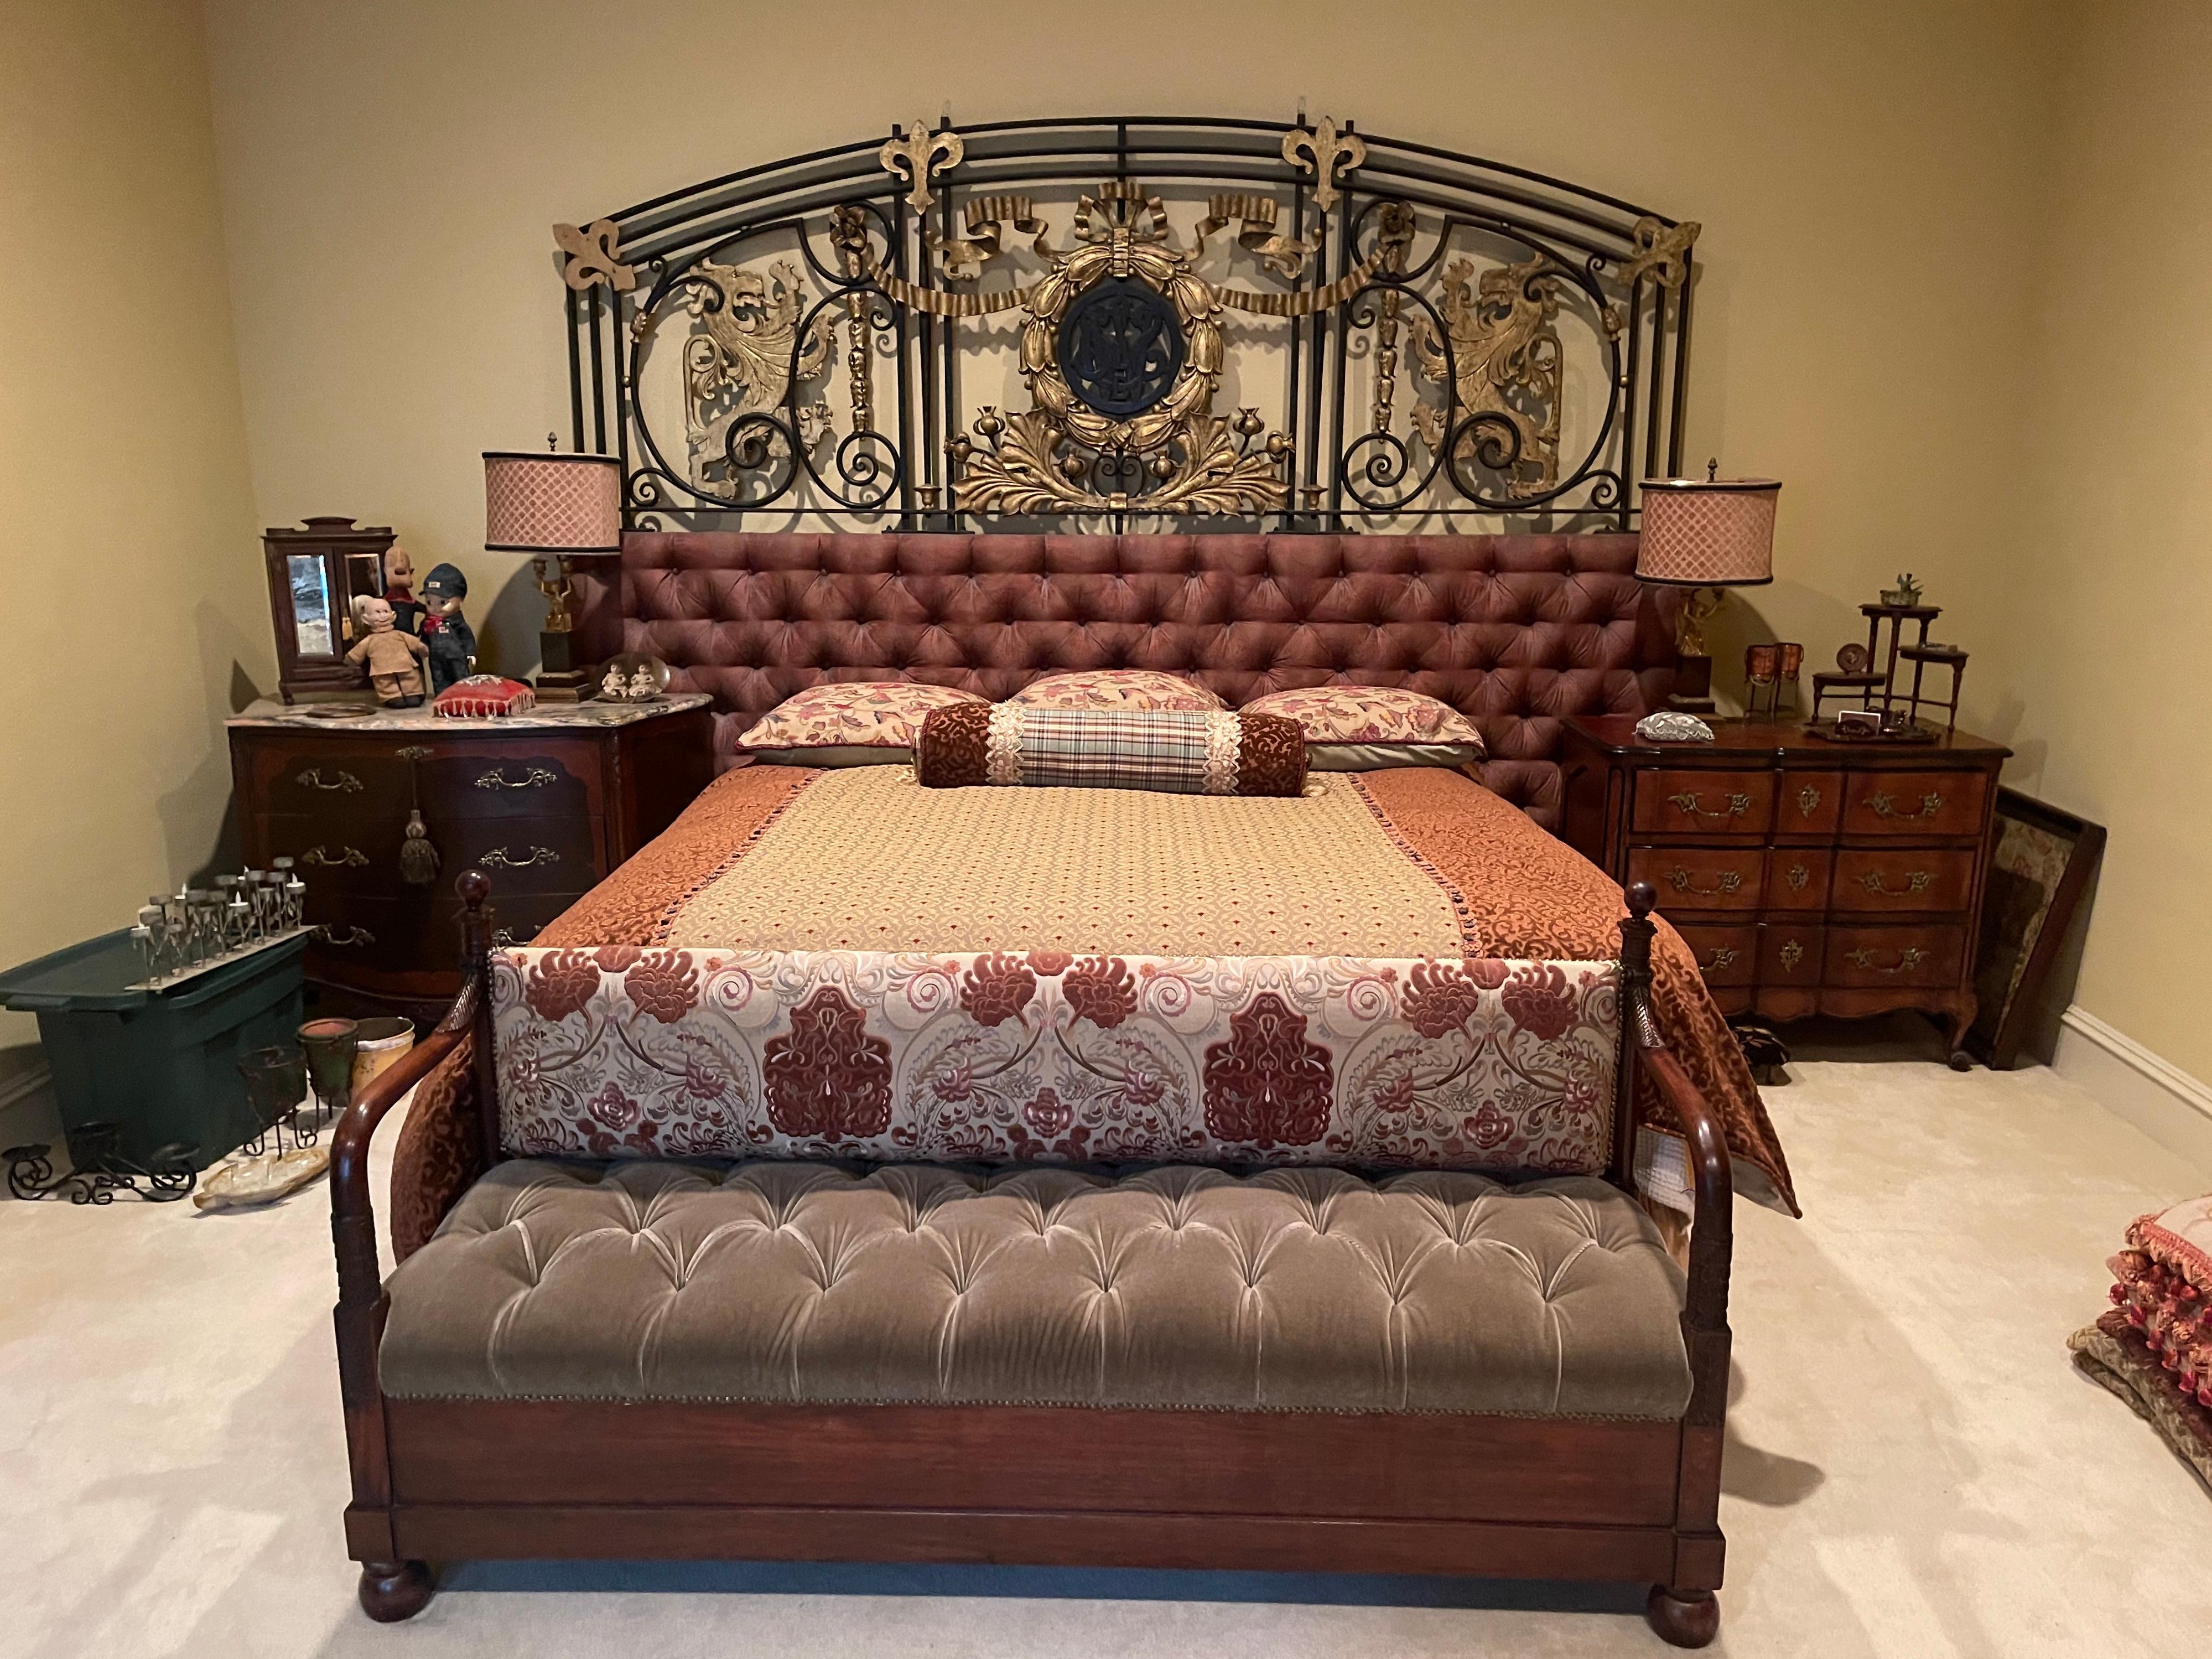 Decorate a master bedroom with this exquisite antique oversized headboard. Crafted in France circa 1780 out of a retired iron and bronze gate or balcony, the Louis XVI-style frame features two main parts; the top is arched, with bronze Fleur-de-Lys,